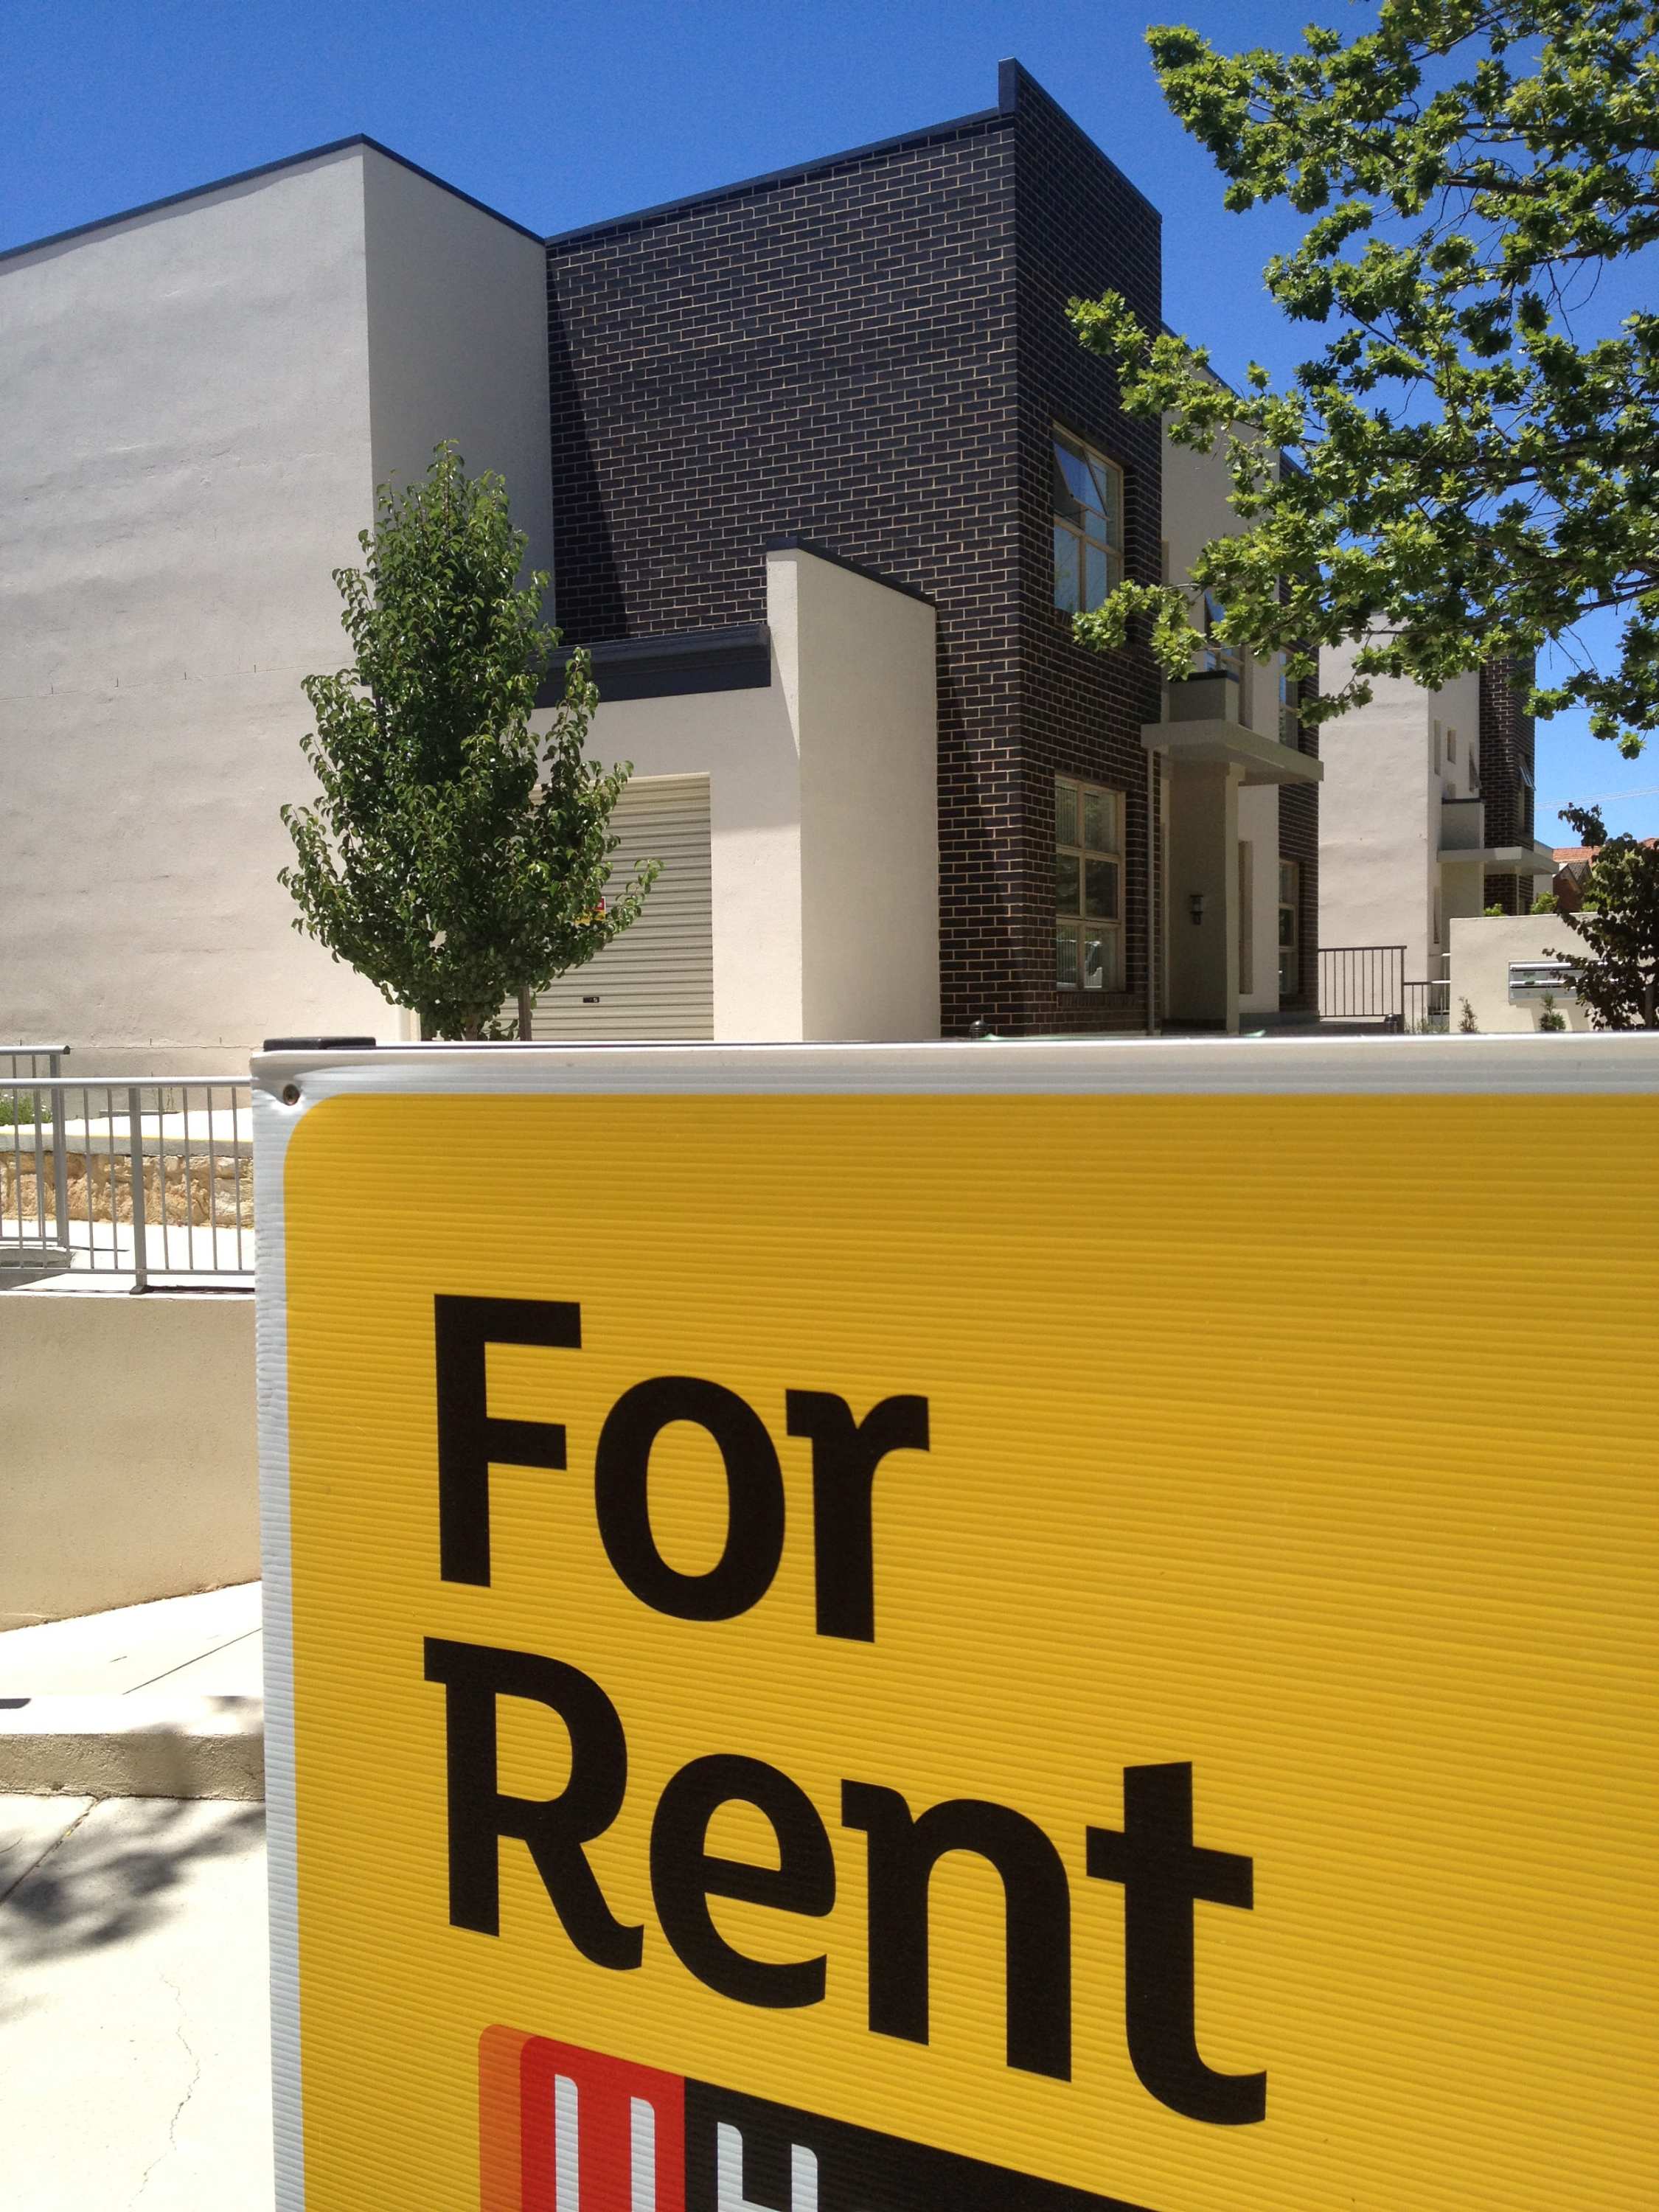 For rent sign outside a new a new单元块” class=